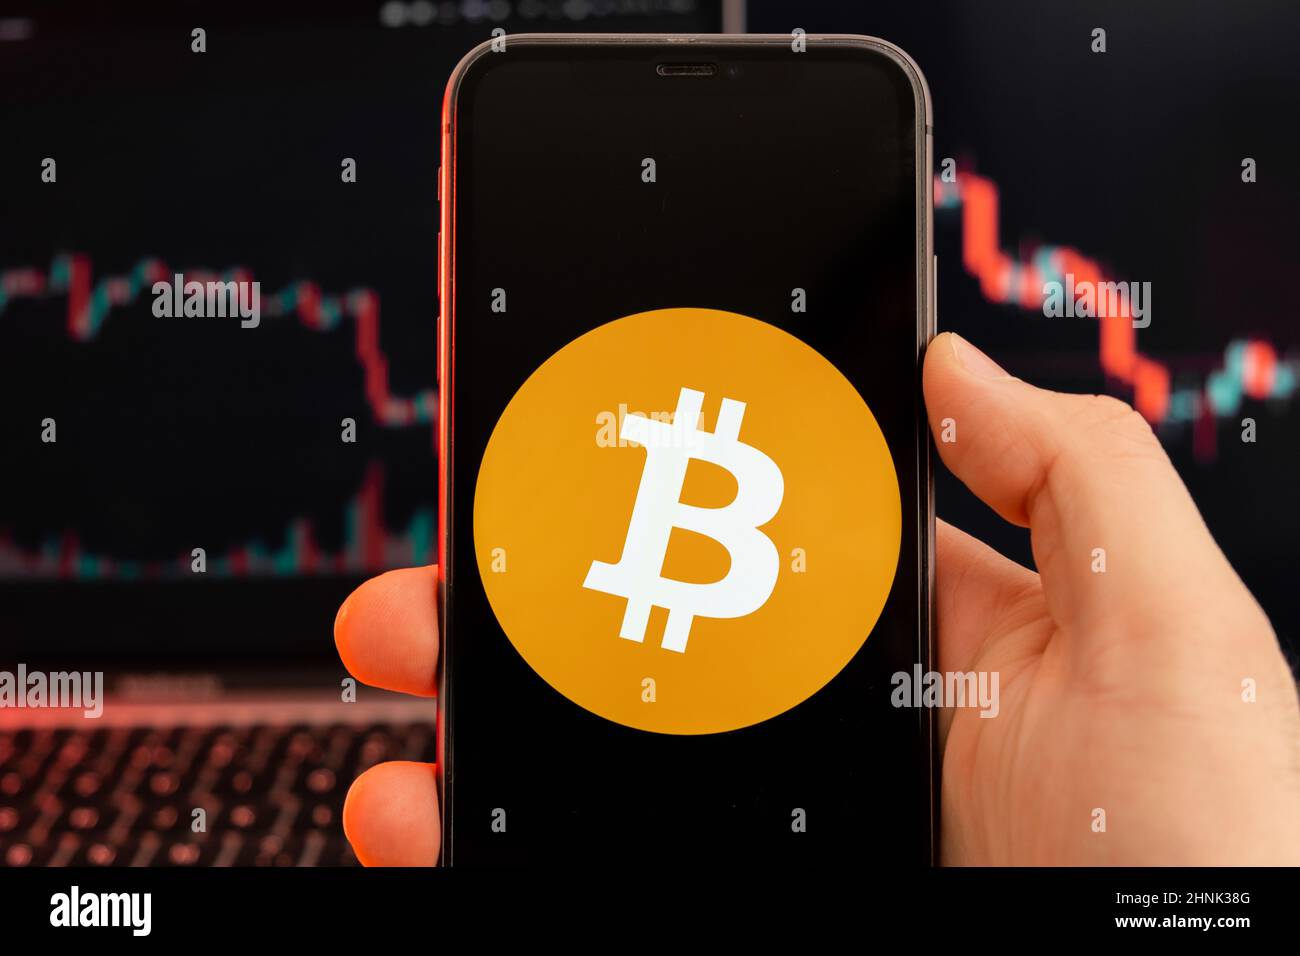 Bitcoin BTC app of cryptocurrency stock market analysis on the screen of mobile phone in man hands and downtrend charts trading data on the background, February 2022, San Francisco, USA. Stock Photo